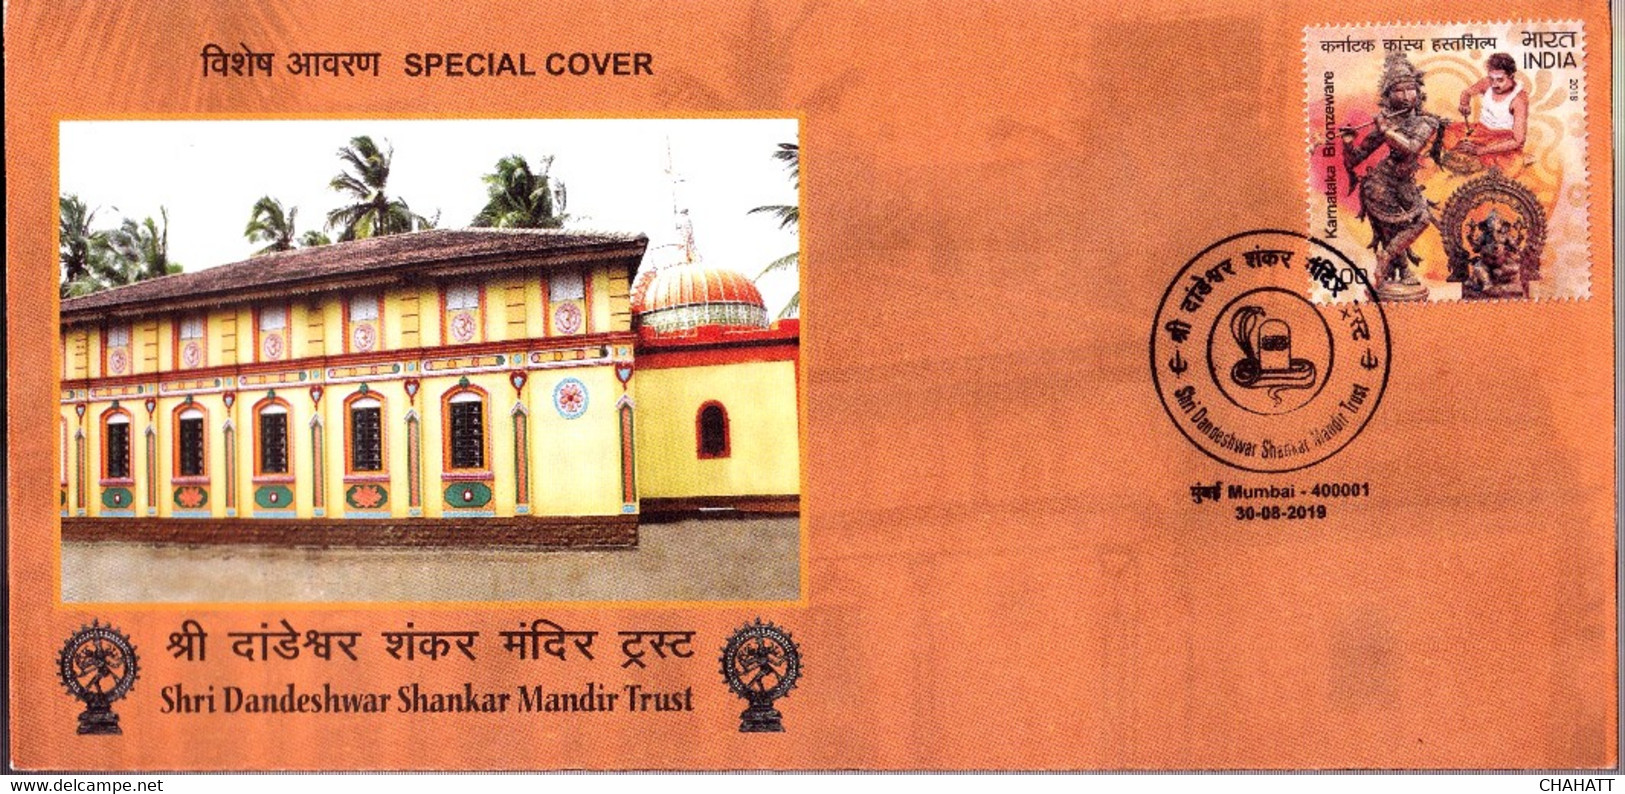 HINDUISM- LORD SHIVA- DANDESHWAR SHANKAR TEMPLE - SPECIAL COVER WITH PICTORIAL CANCELLATION- INDIA-2019-BX3-30 - Hinduismo